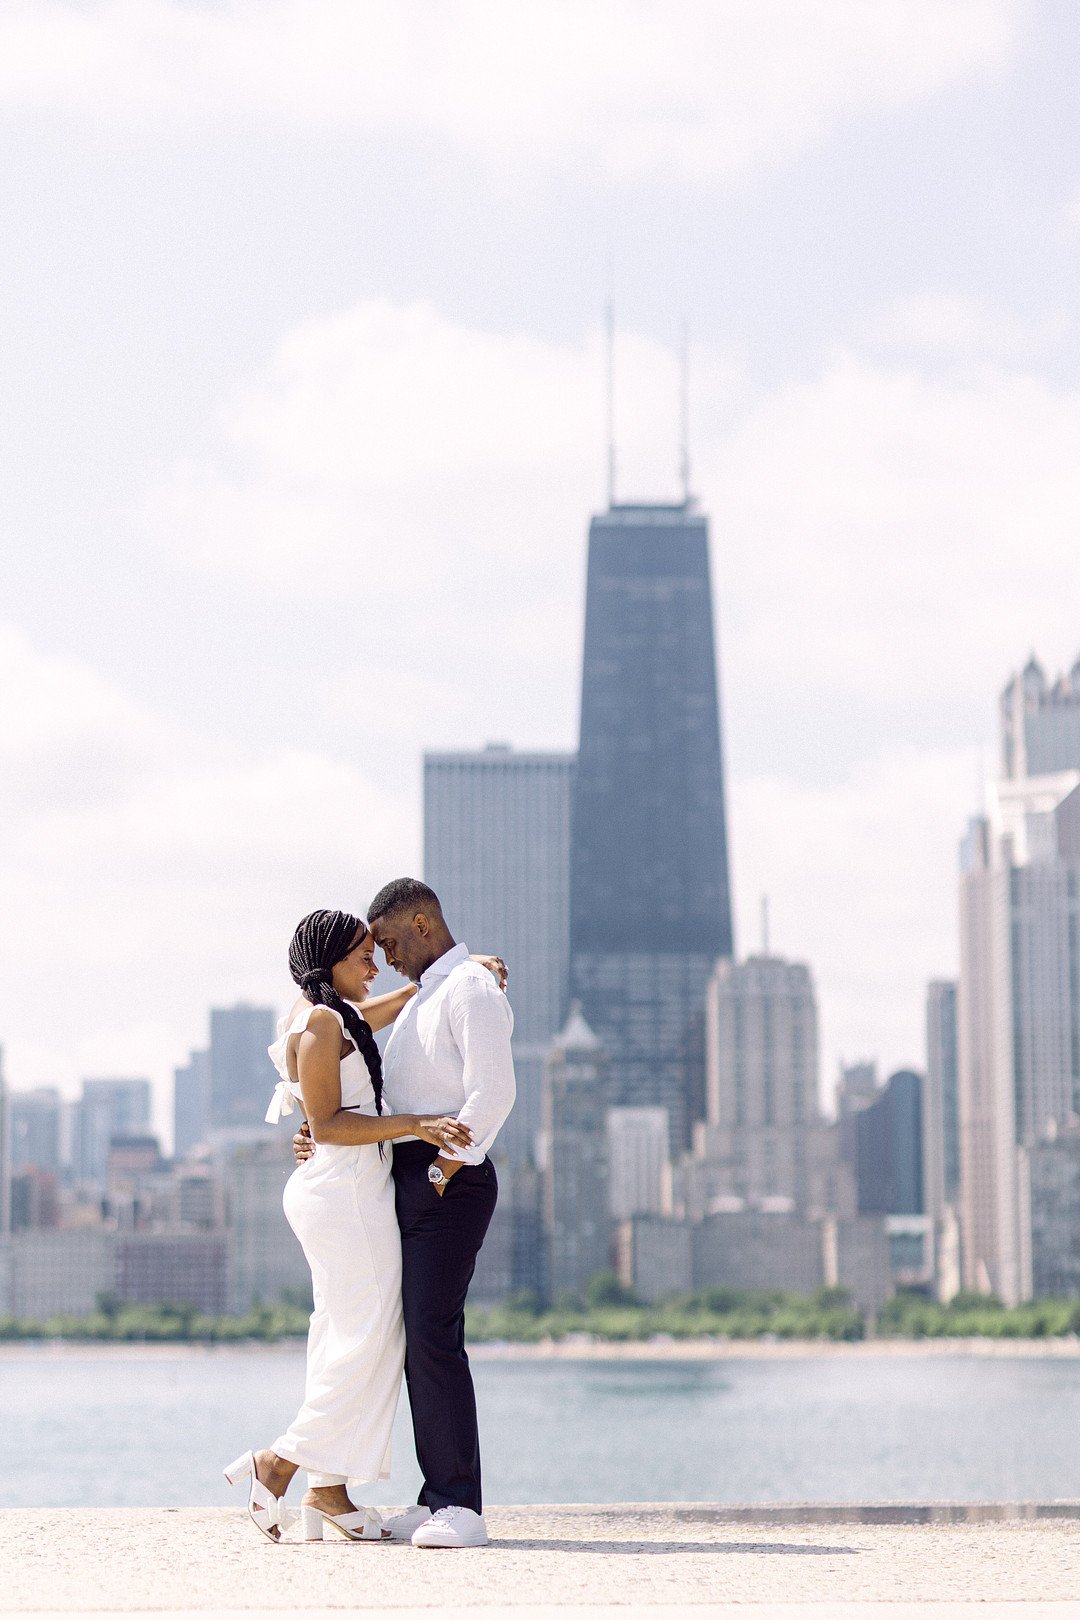 Coleman_Mitchell_Stephanie Wood Photography_krystle-sean-chicago-engagement-0600_low.jpg